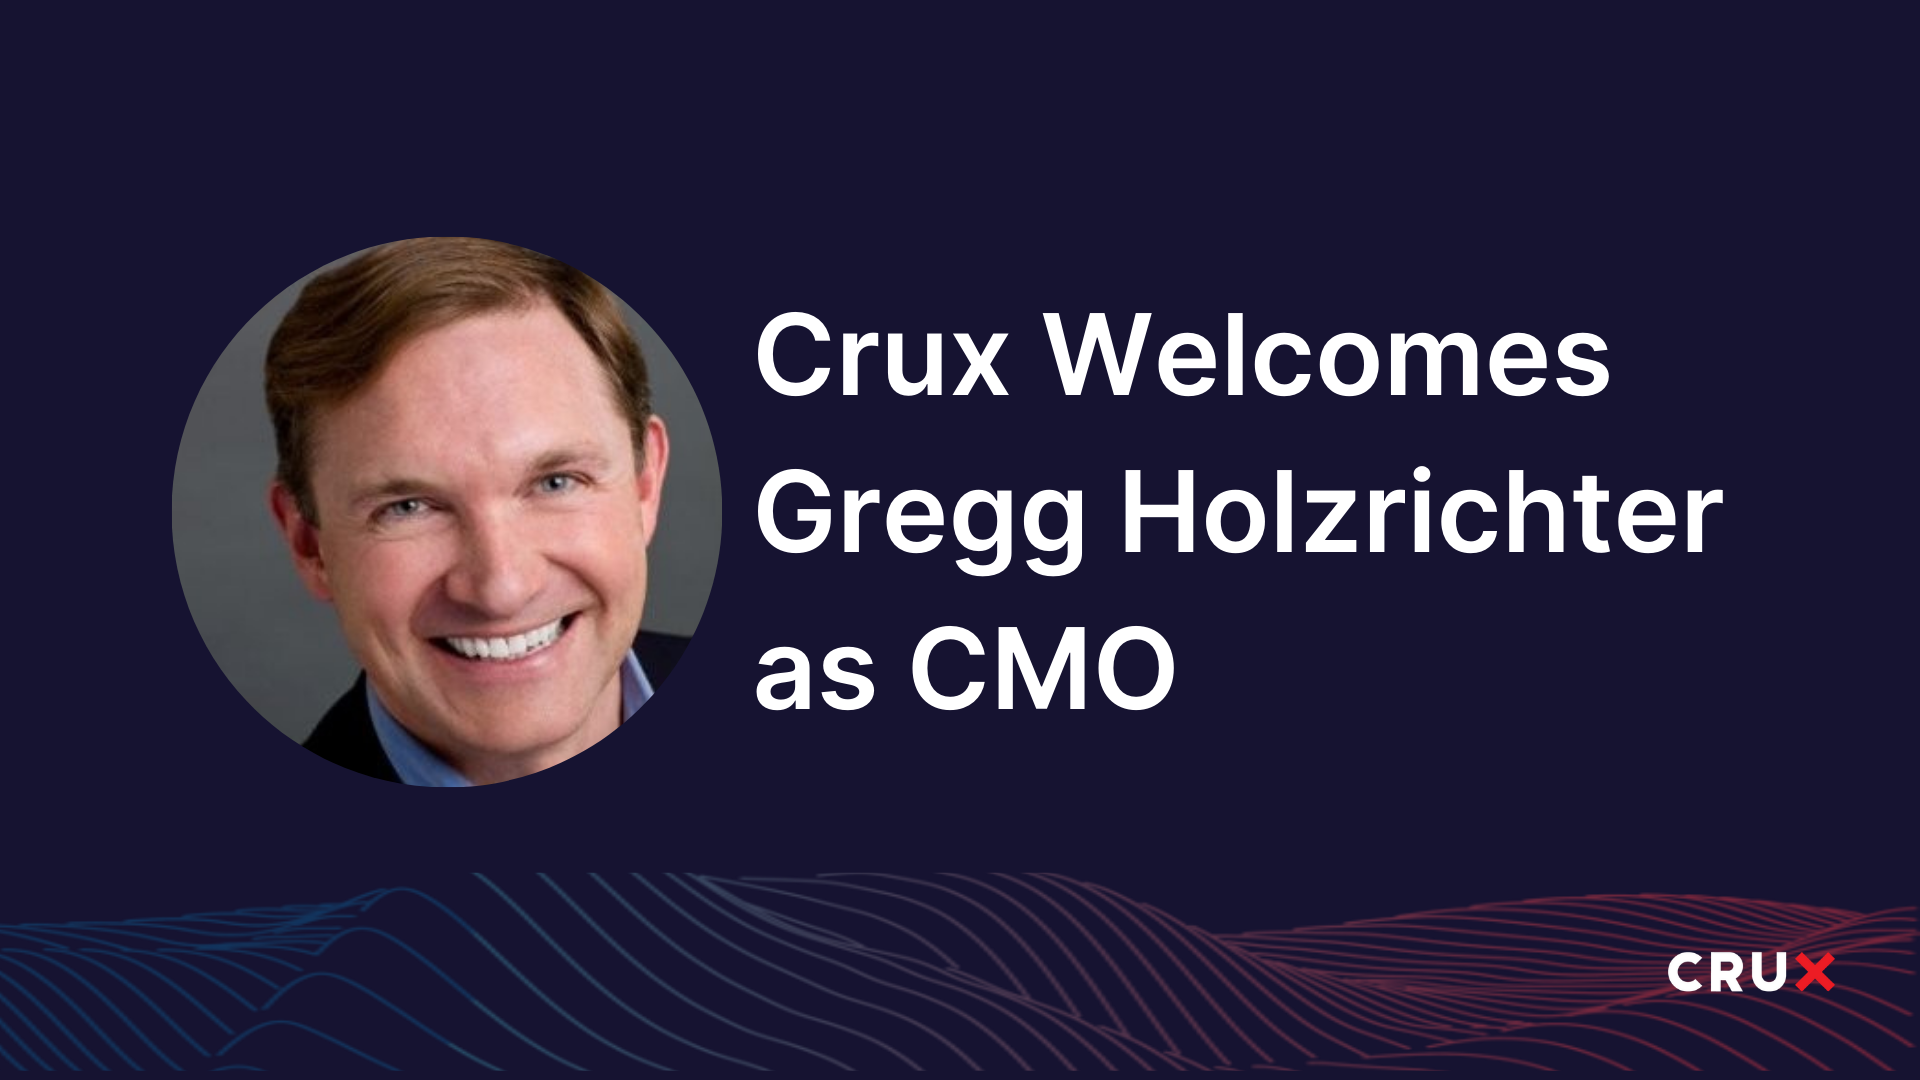 Crux Welcomes Gregg Holzrichter as Chief Marketing Officer